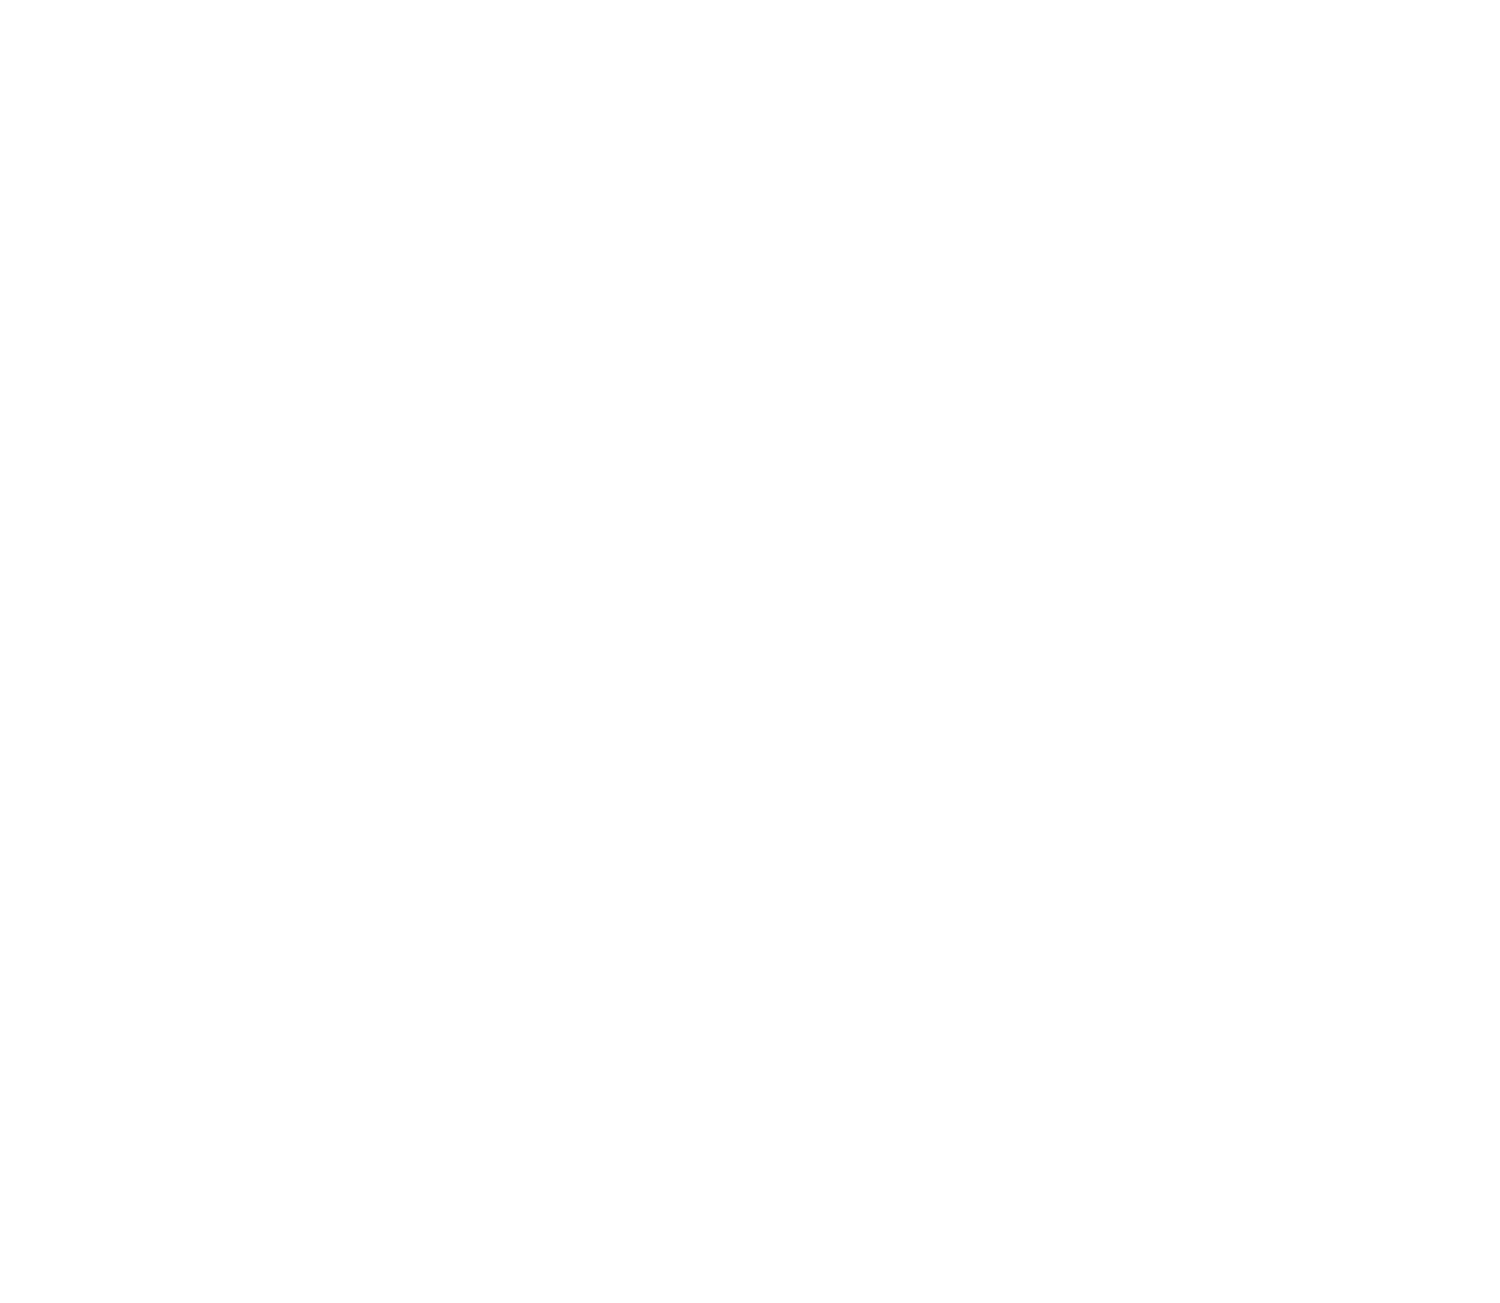 Healthy Pelvis Physical Therapy